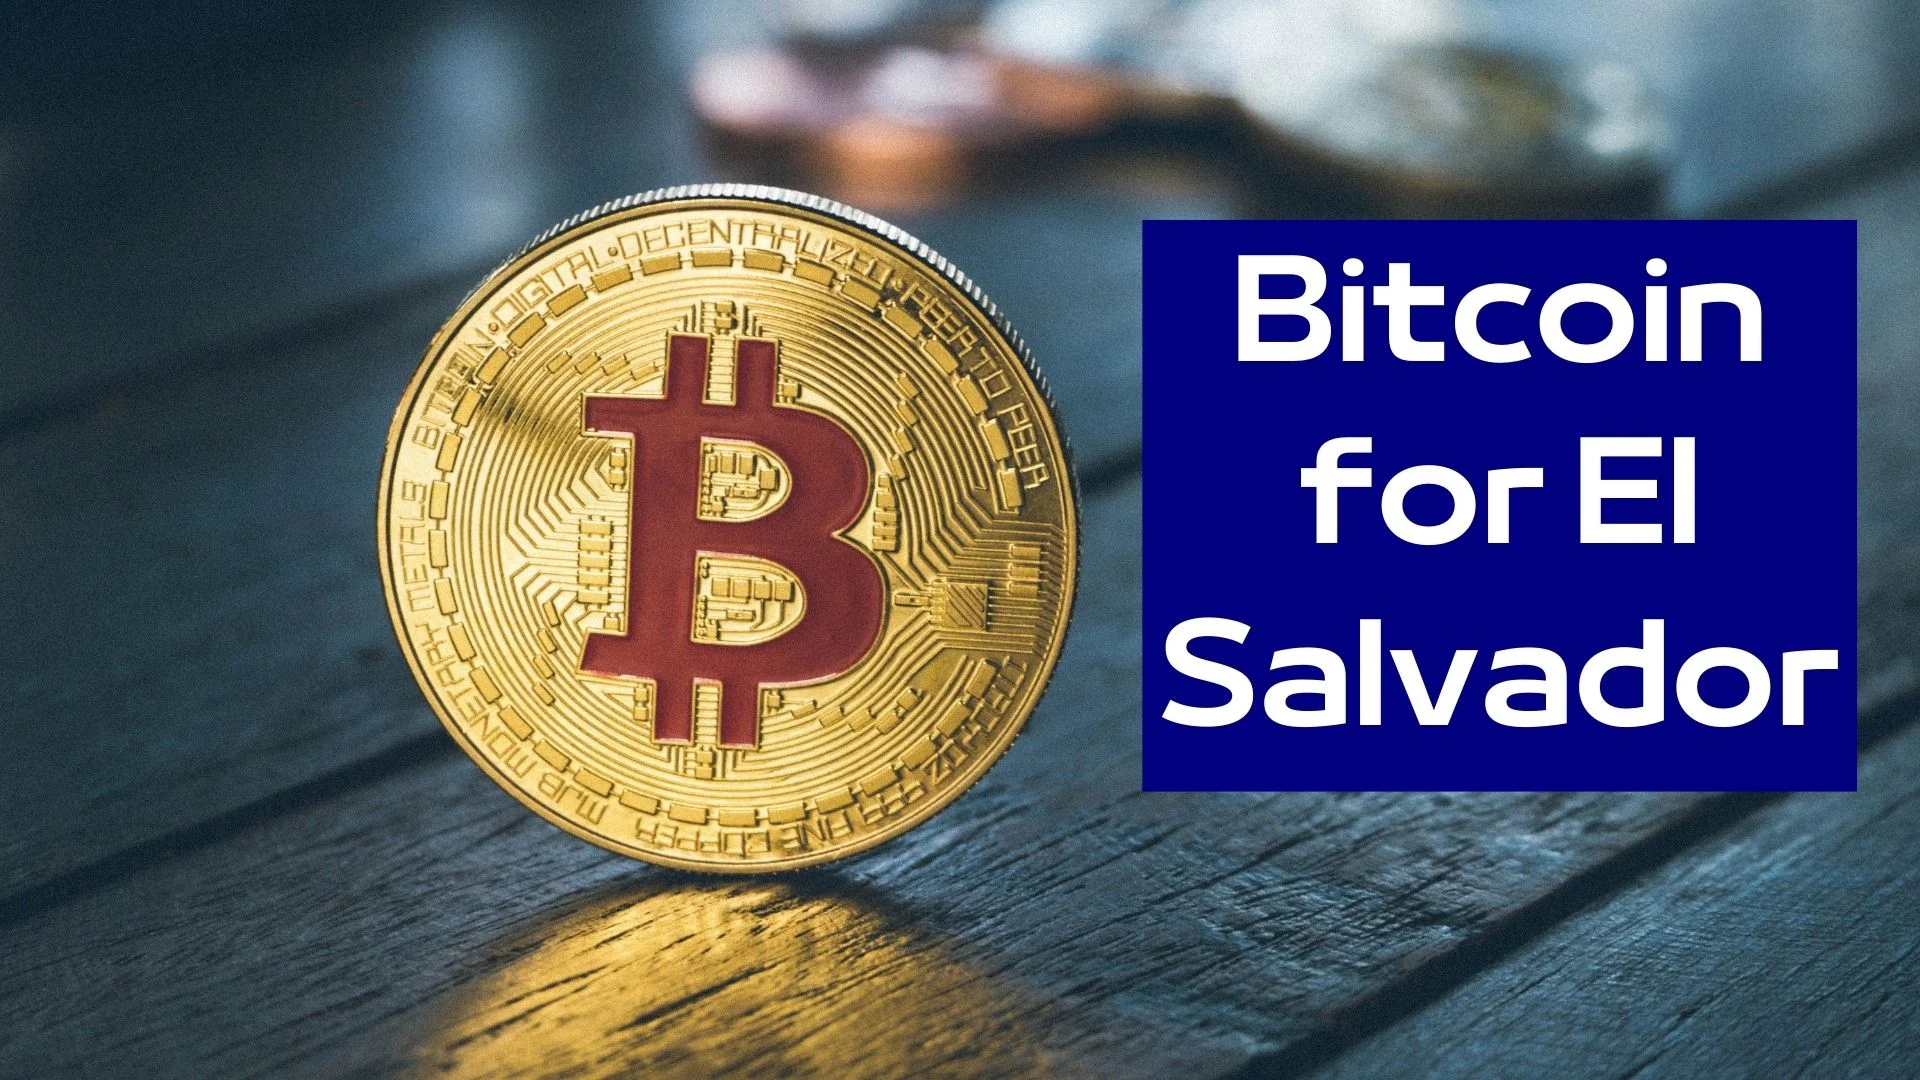 What bitcoin has provided to El Salvador  The adoption of bitcoin as a legal currency has led to controversy    but also undeniable benefits for the country.    El Salvador made history by becoming the first country to use bitcoin as legal currency when its president officially announced it in June 2021.